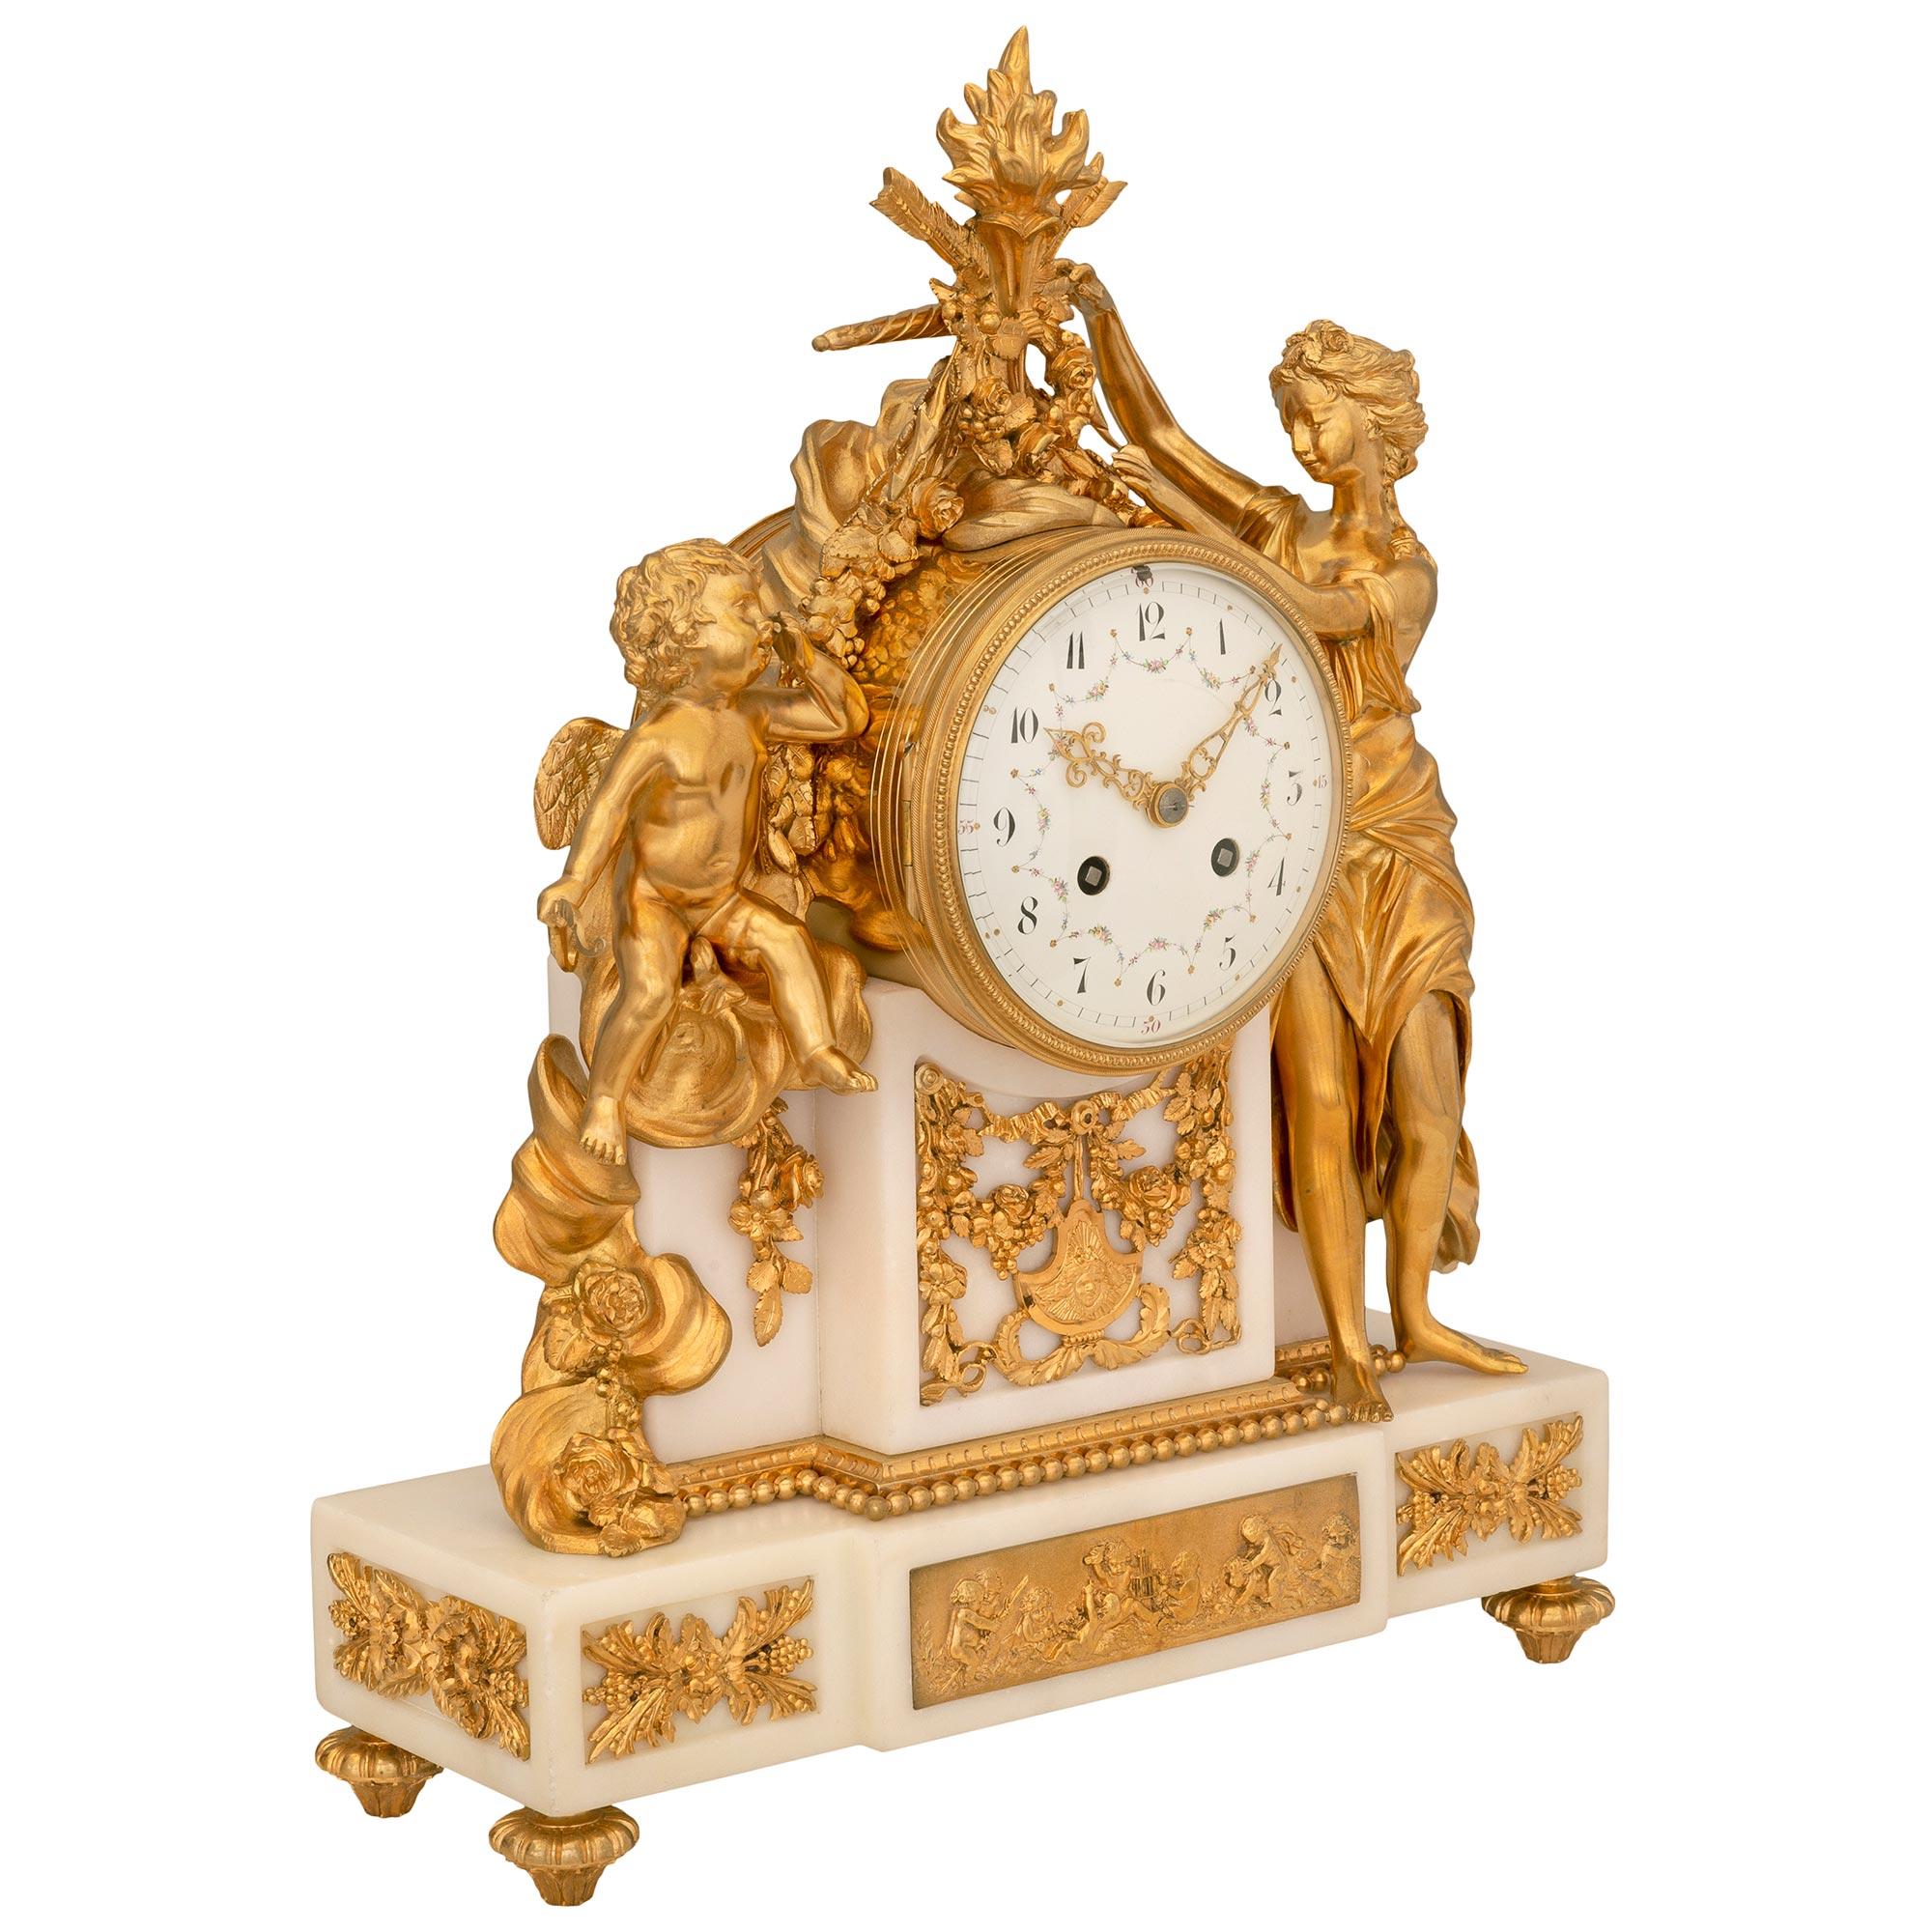 A spectacular French mid 19th century Louis XVI st. white Carrara marble and ormolu clock in the manner of Clodion. The clock is raised by elegant reeded topie shaped feet below the white Carrara marble base. The base displays a beautiful